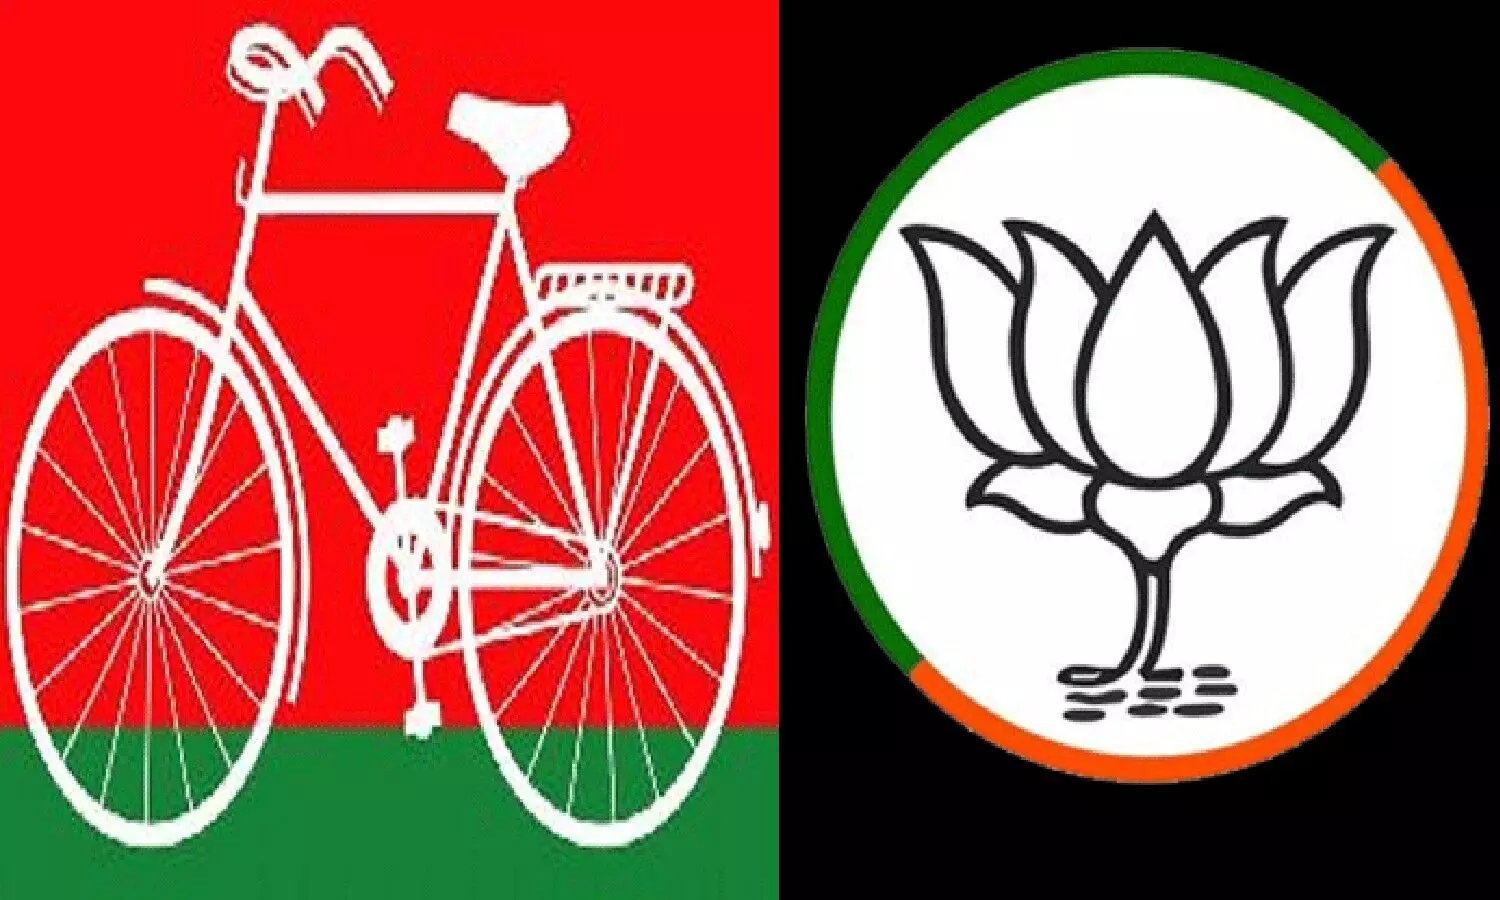 Lotus or cycle will bloom in the district, political turmoil continues for District Panchayat President